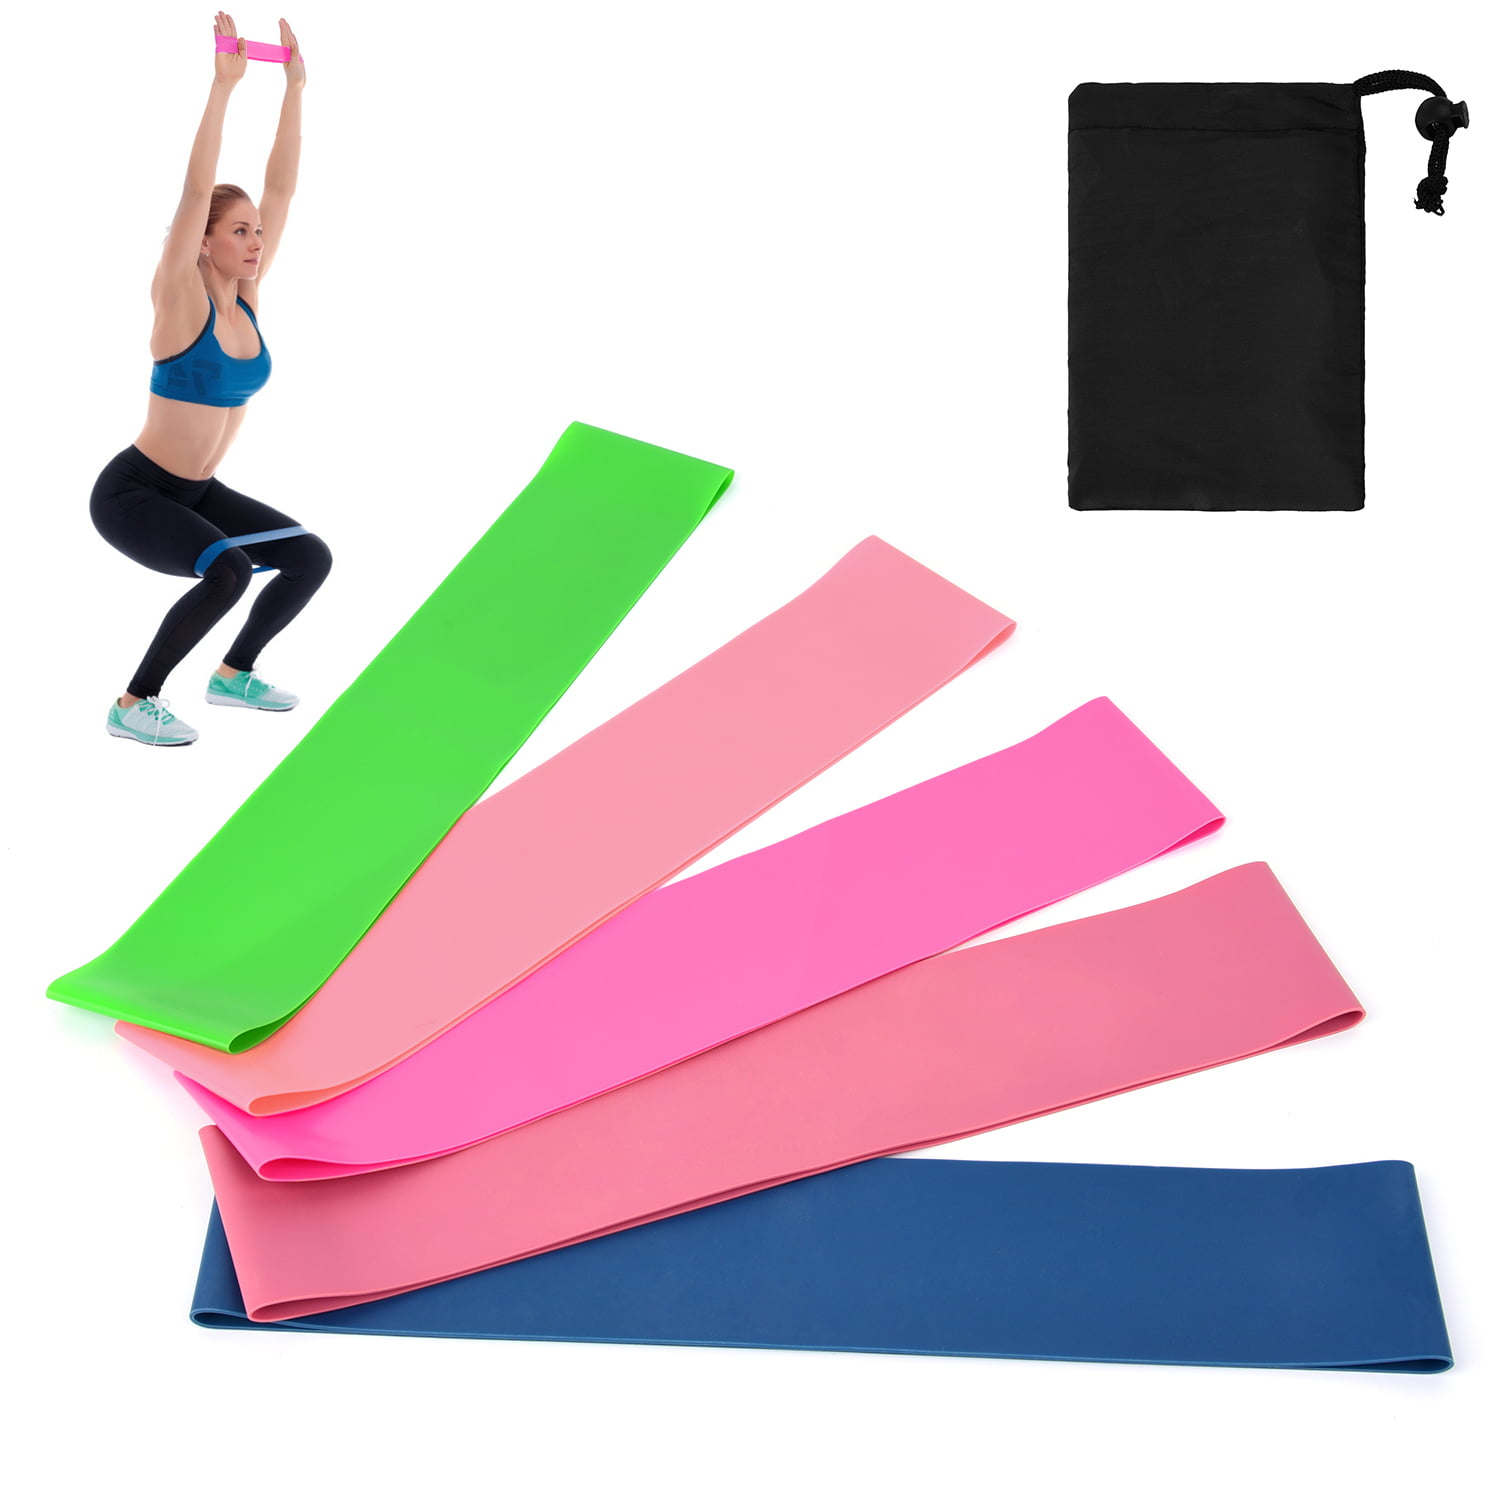 Home Gym Fitness Yoga Stretch Exercise Elastic Resistance Loop Bands Set of 4 